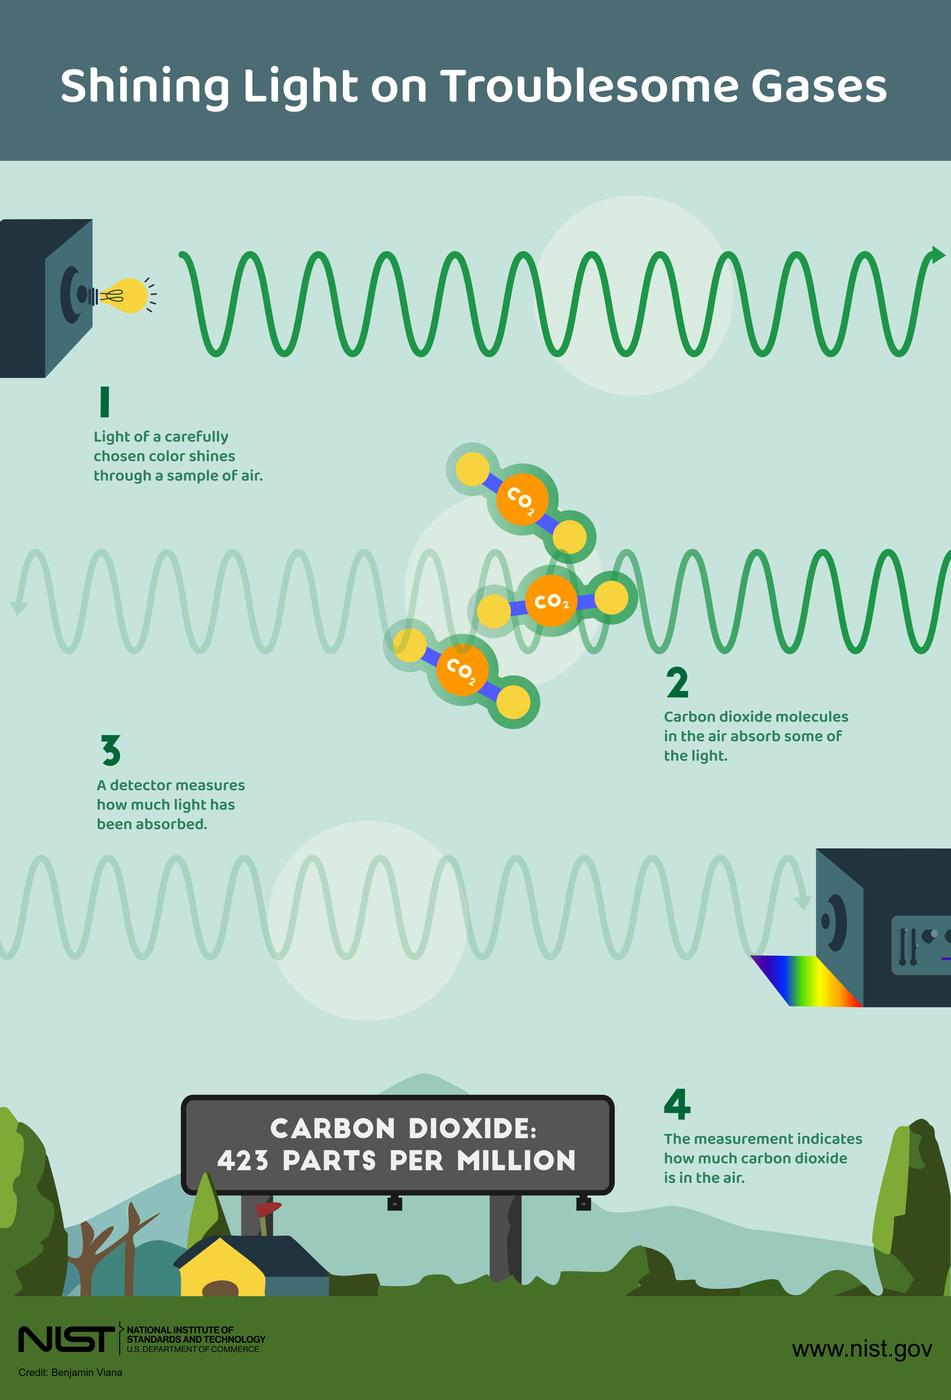 Infographic titled "Shining Light on Troublesome Gases" shows the process of colored light being directed through carbon dioxide molecules with a detector measuring how much light has been absorbed. 